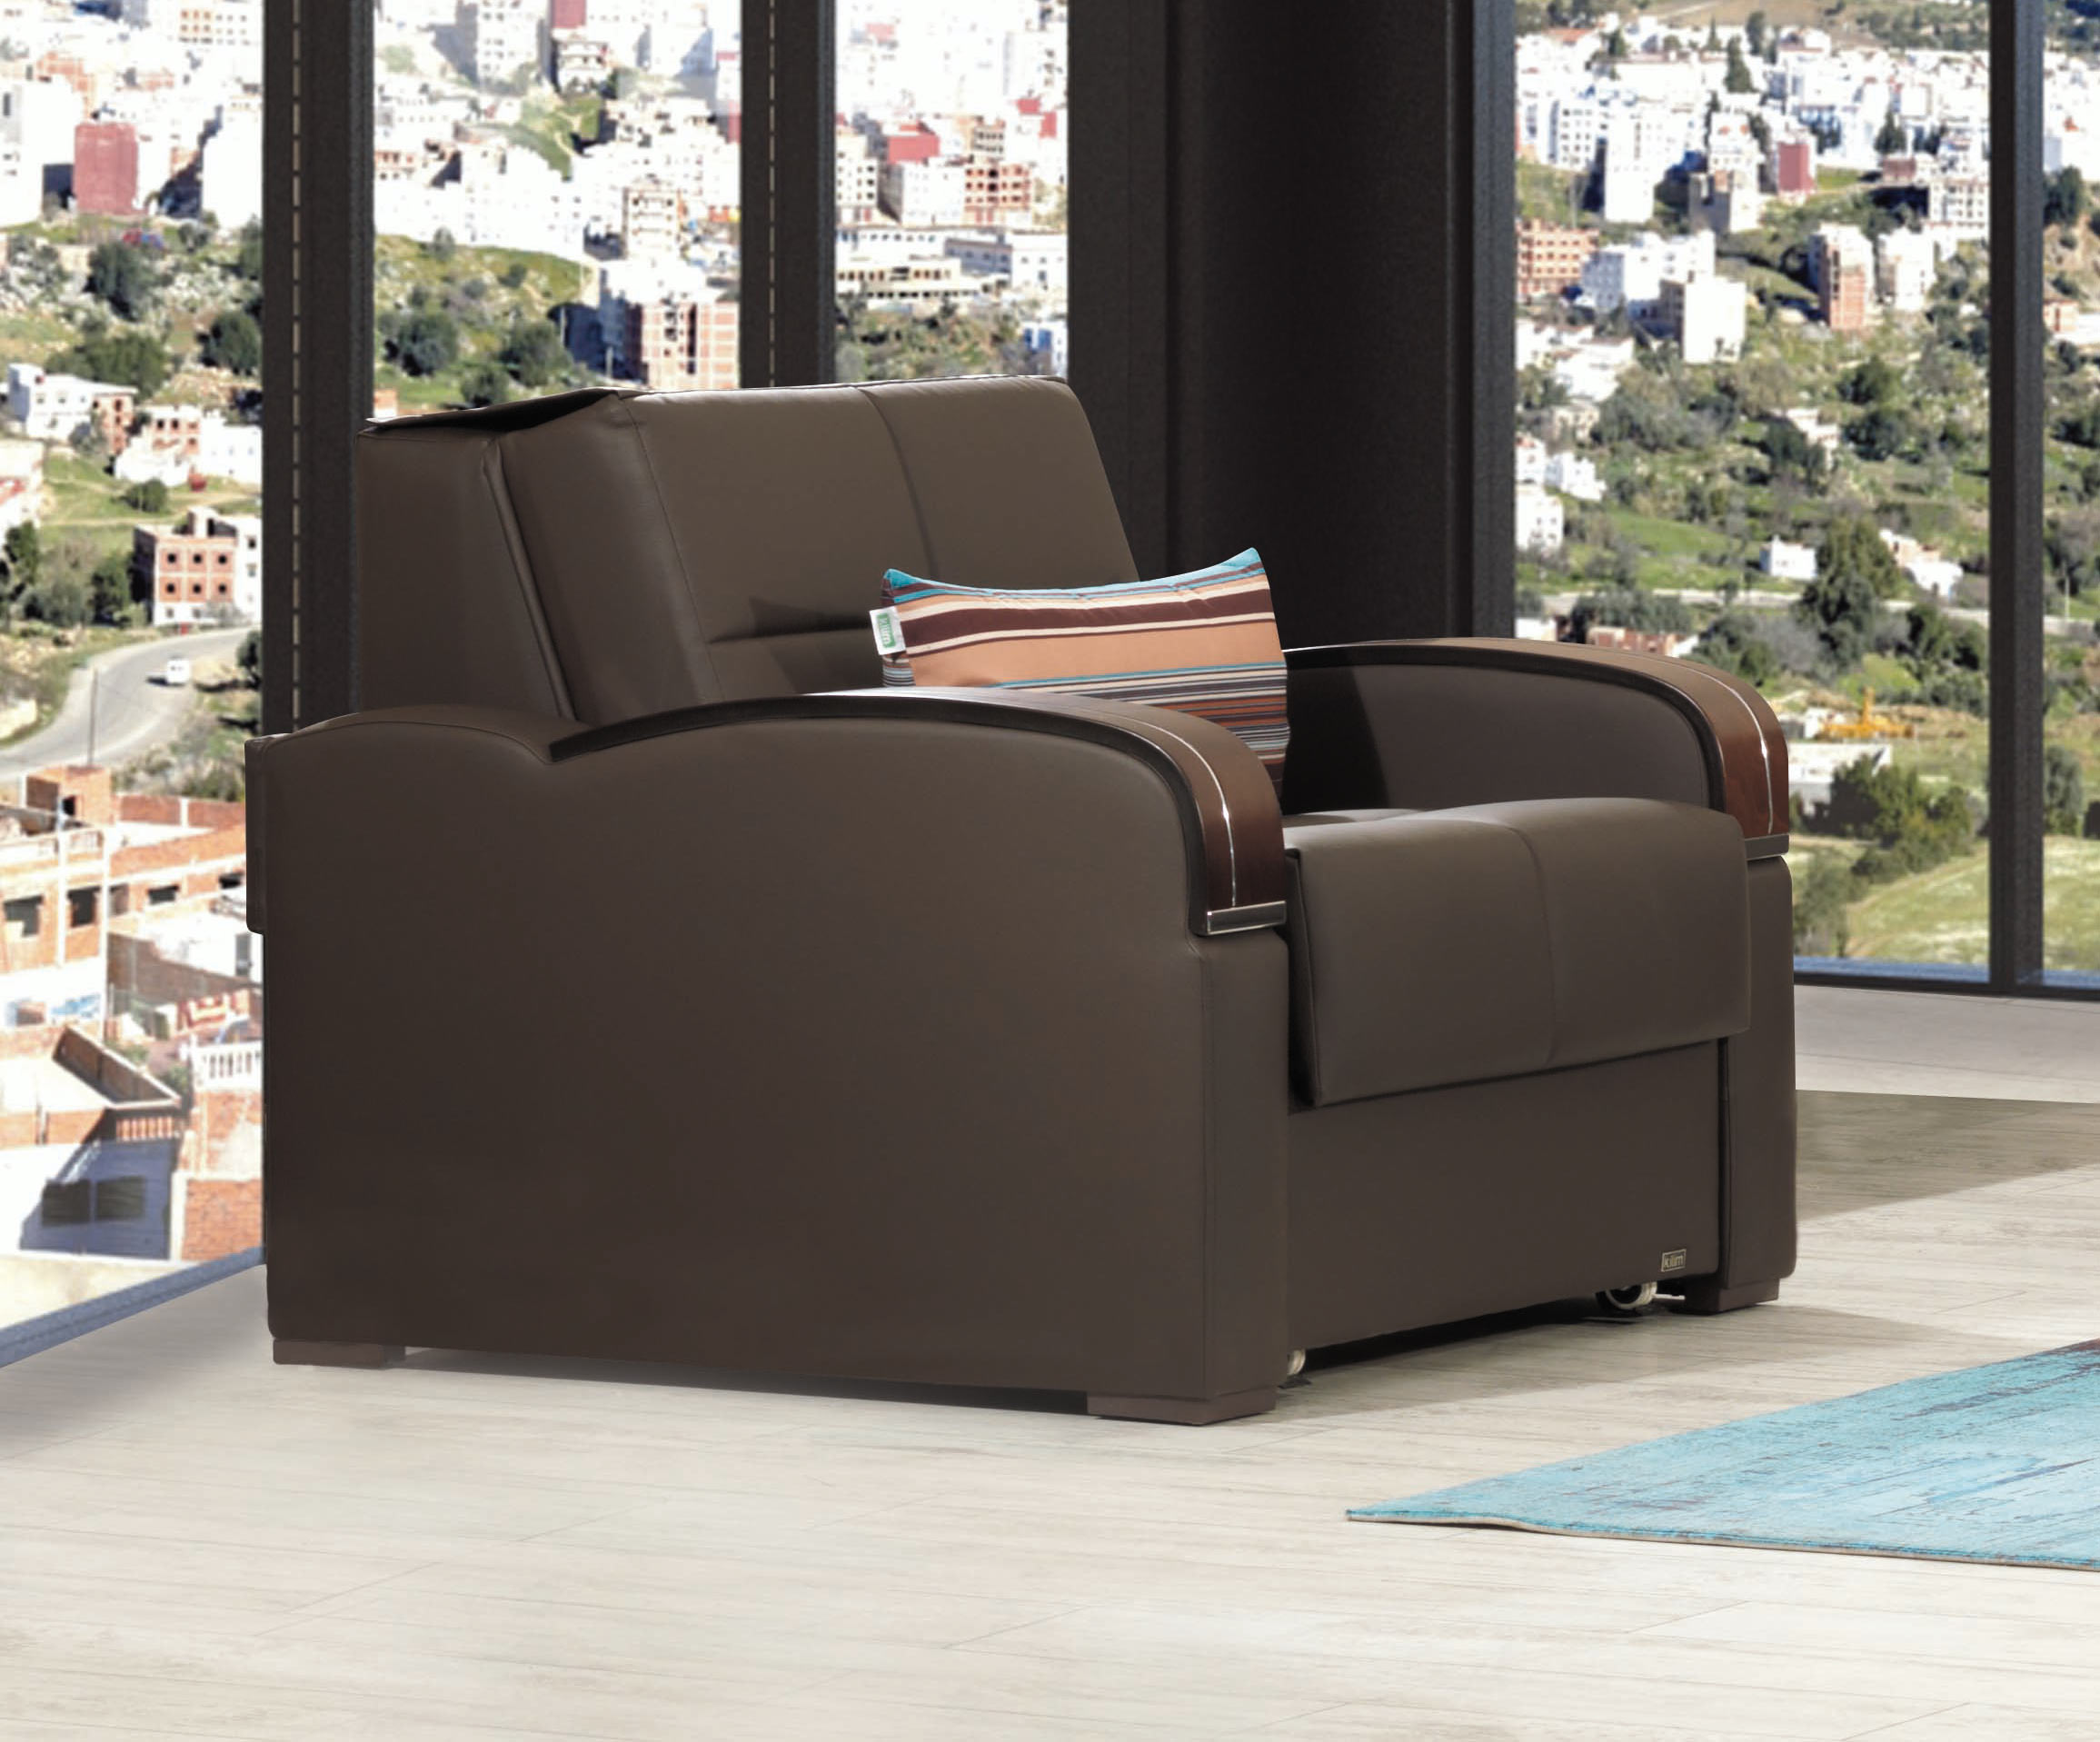 Sleep Plus Brown Pu Leather Convertible Chair Bed By Casamode